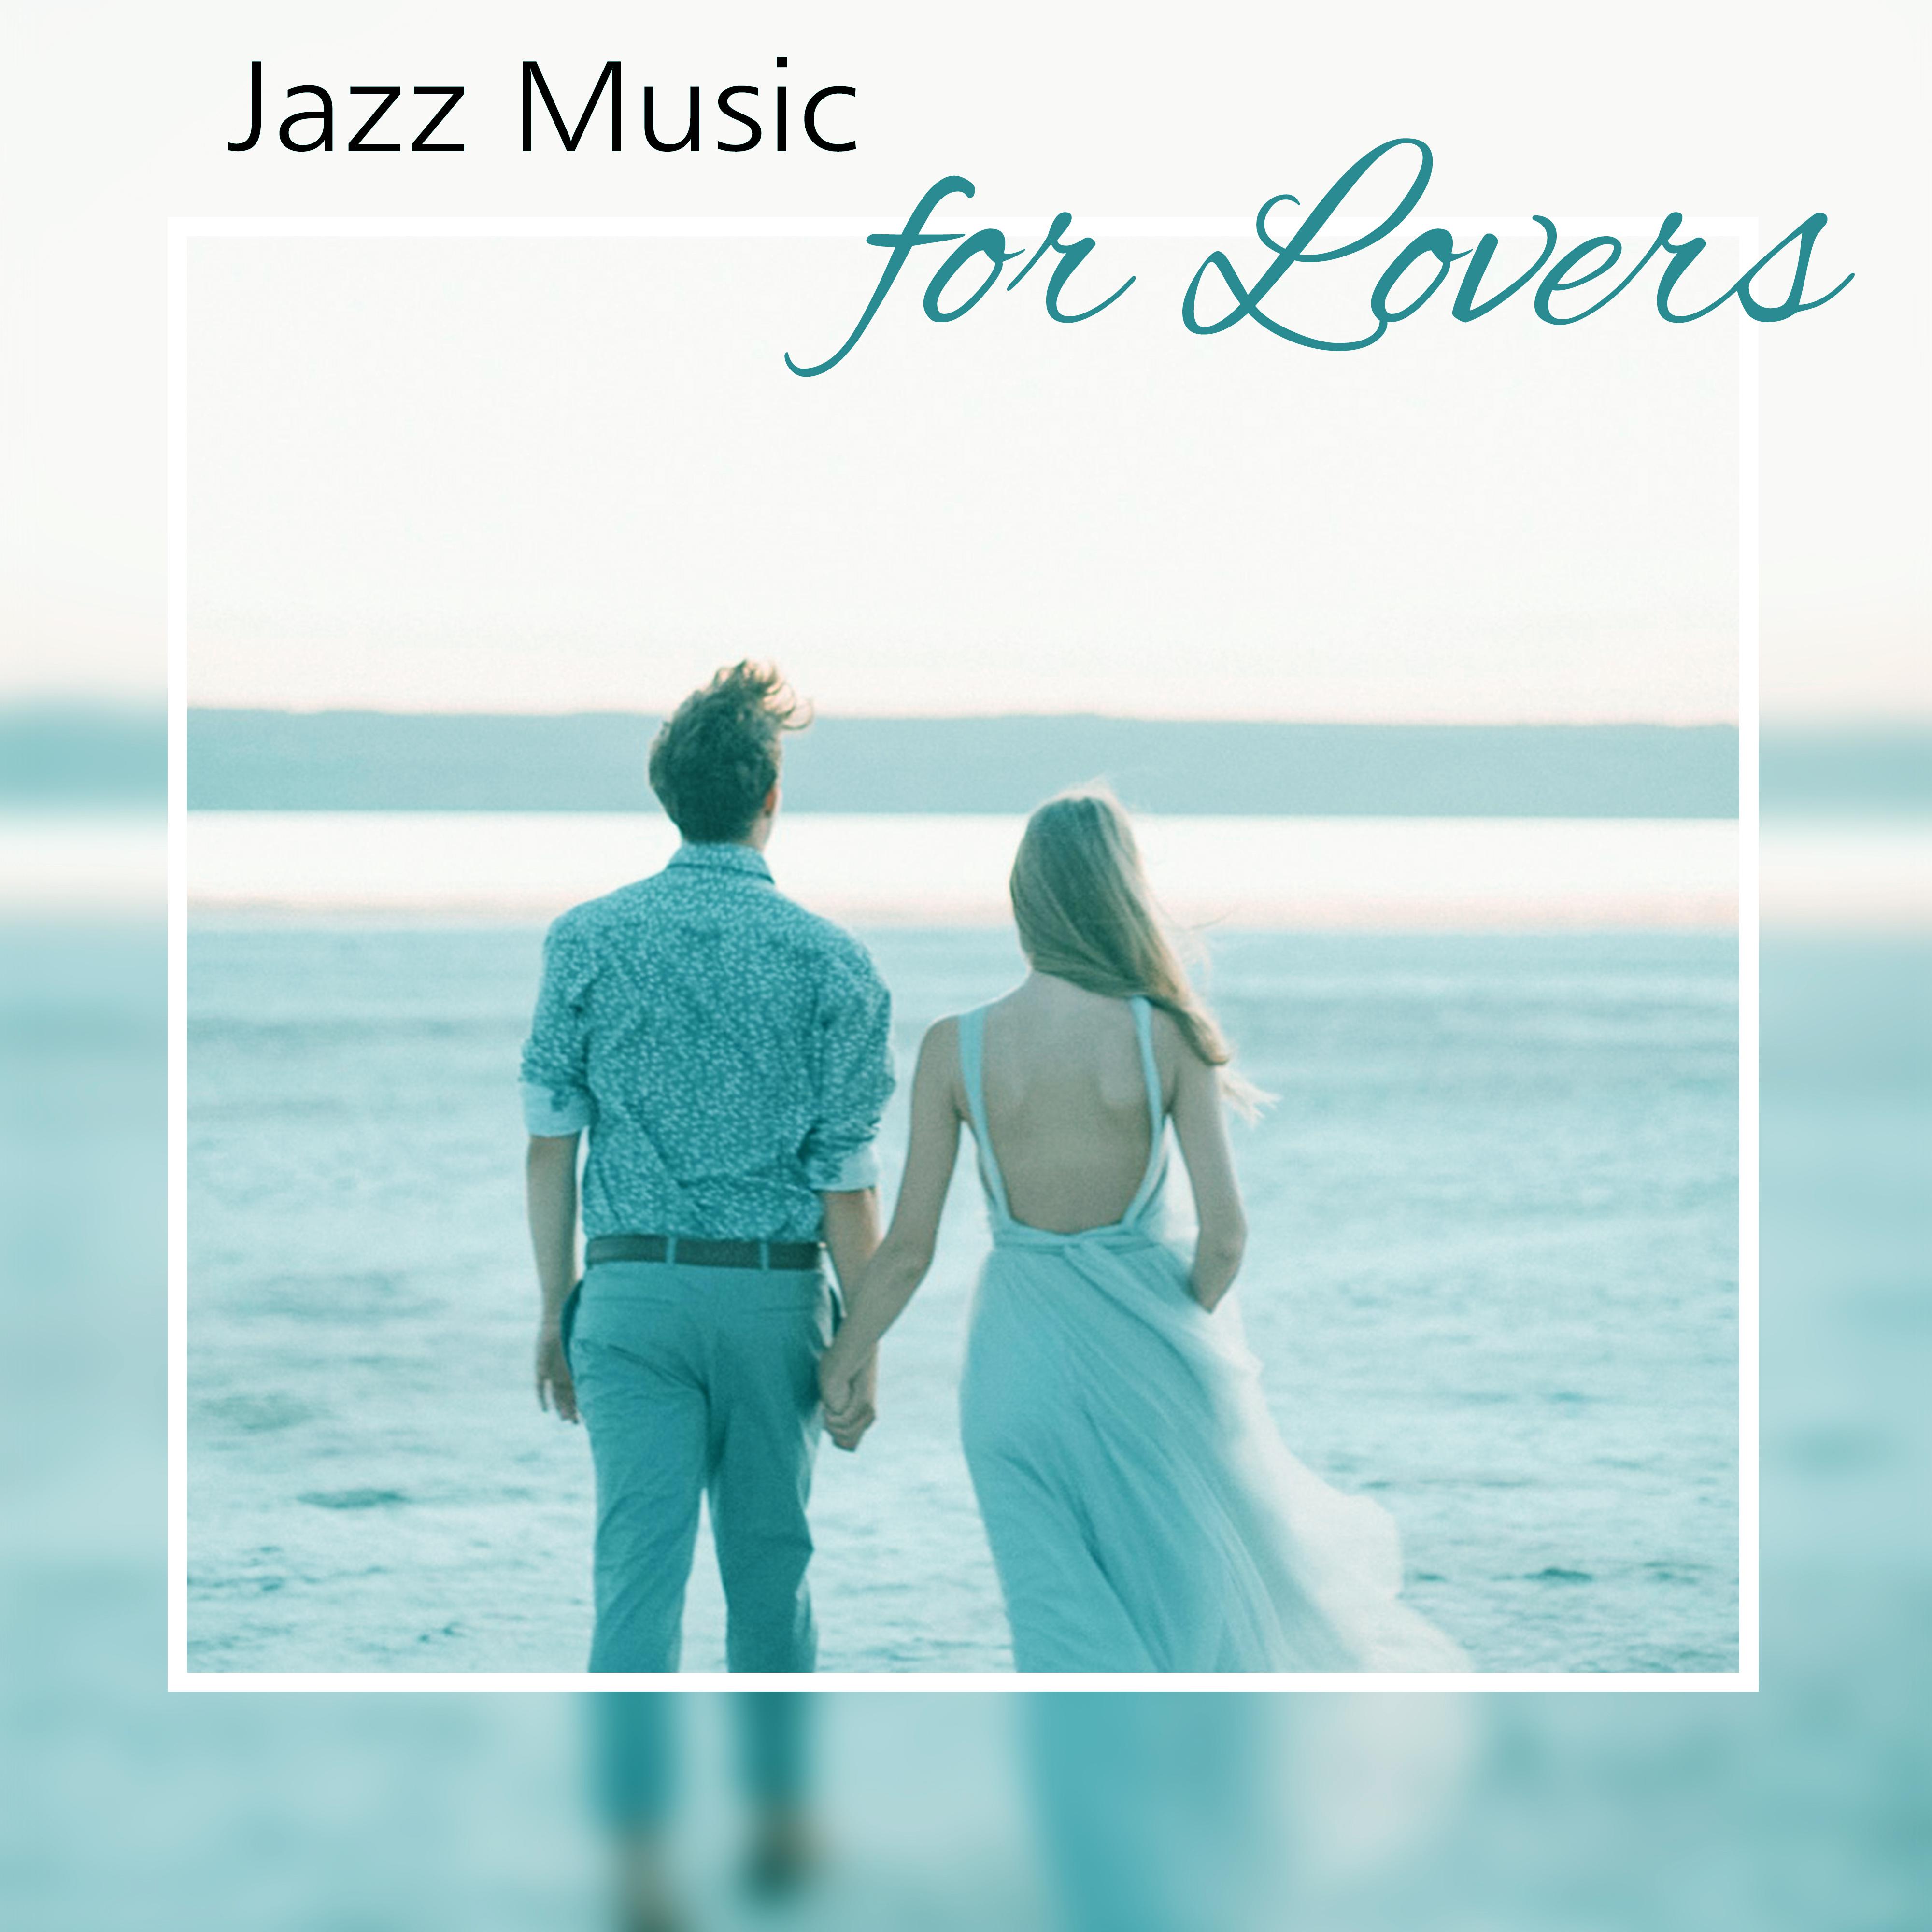 Jazz Music for Lovers – Romantic Jazz Sounds, Music for First Date, Candle Light Dinner, Hot Jazz Note